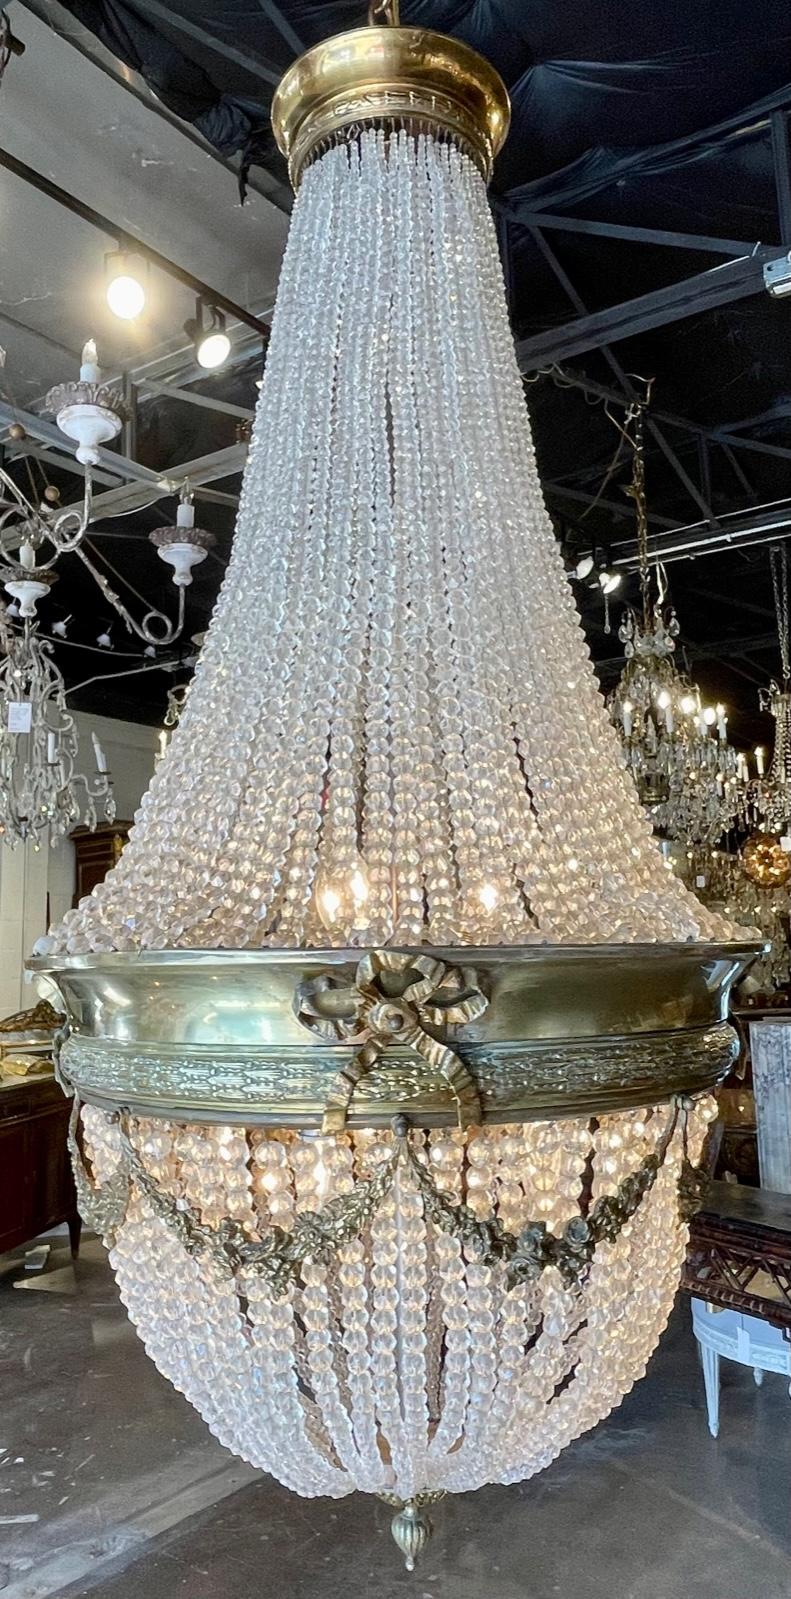 19th century French Louis XVI style gilt bronze and beaded crystal basket chandelier. Circa 1890. The chandelier has been professionally re-wired, cleaned and is ready to hang. Includes matching chain and canopy.